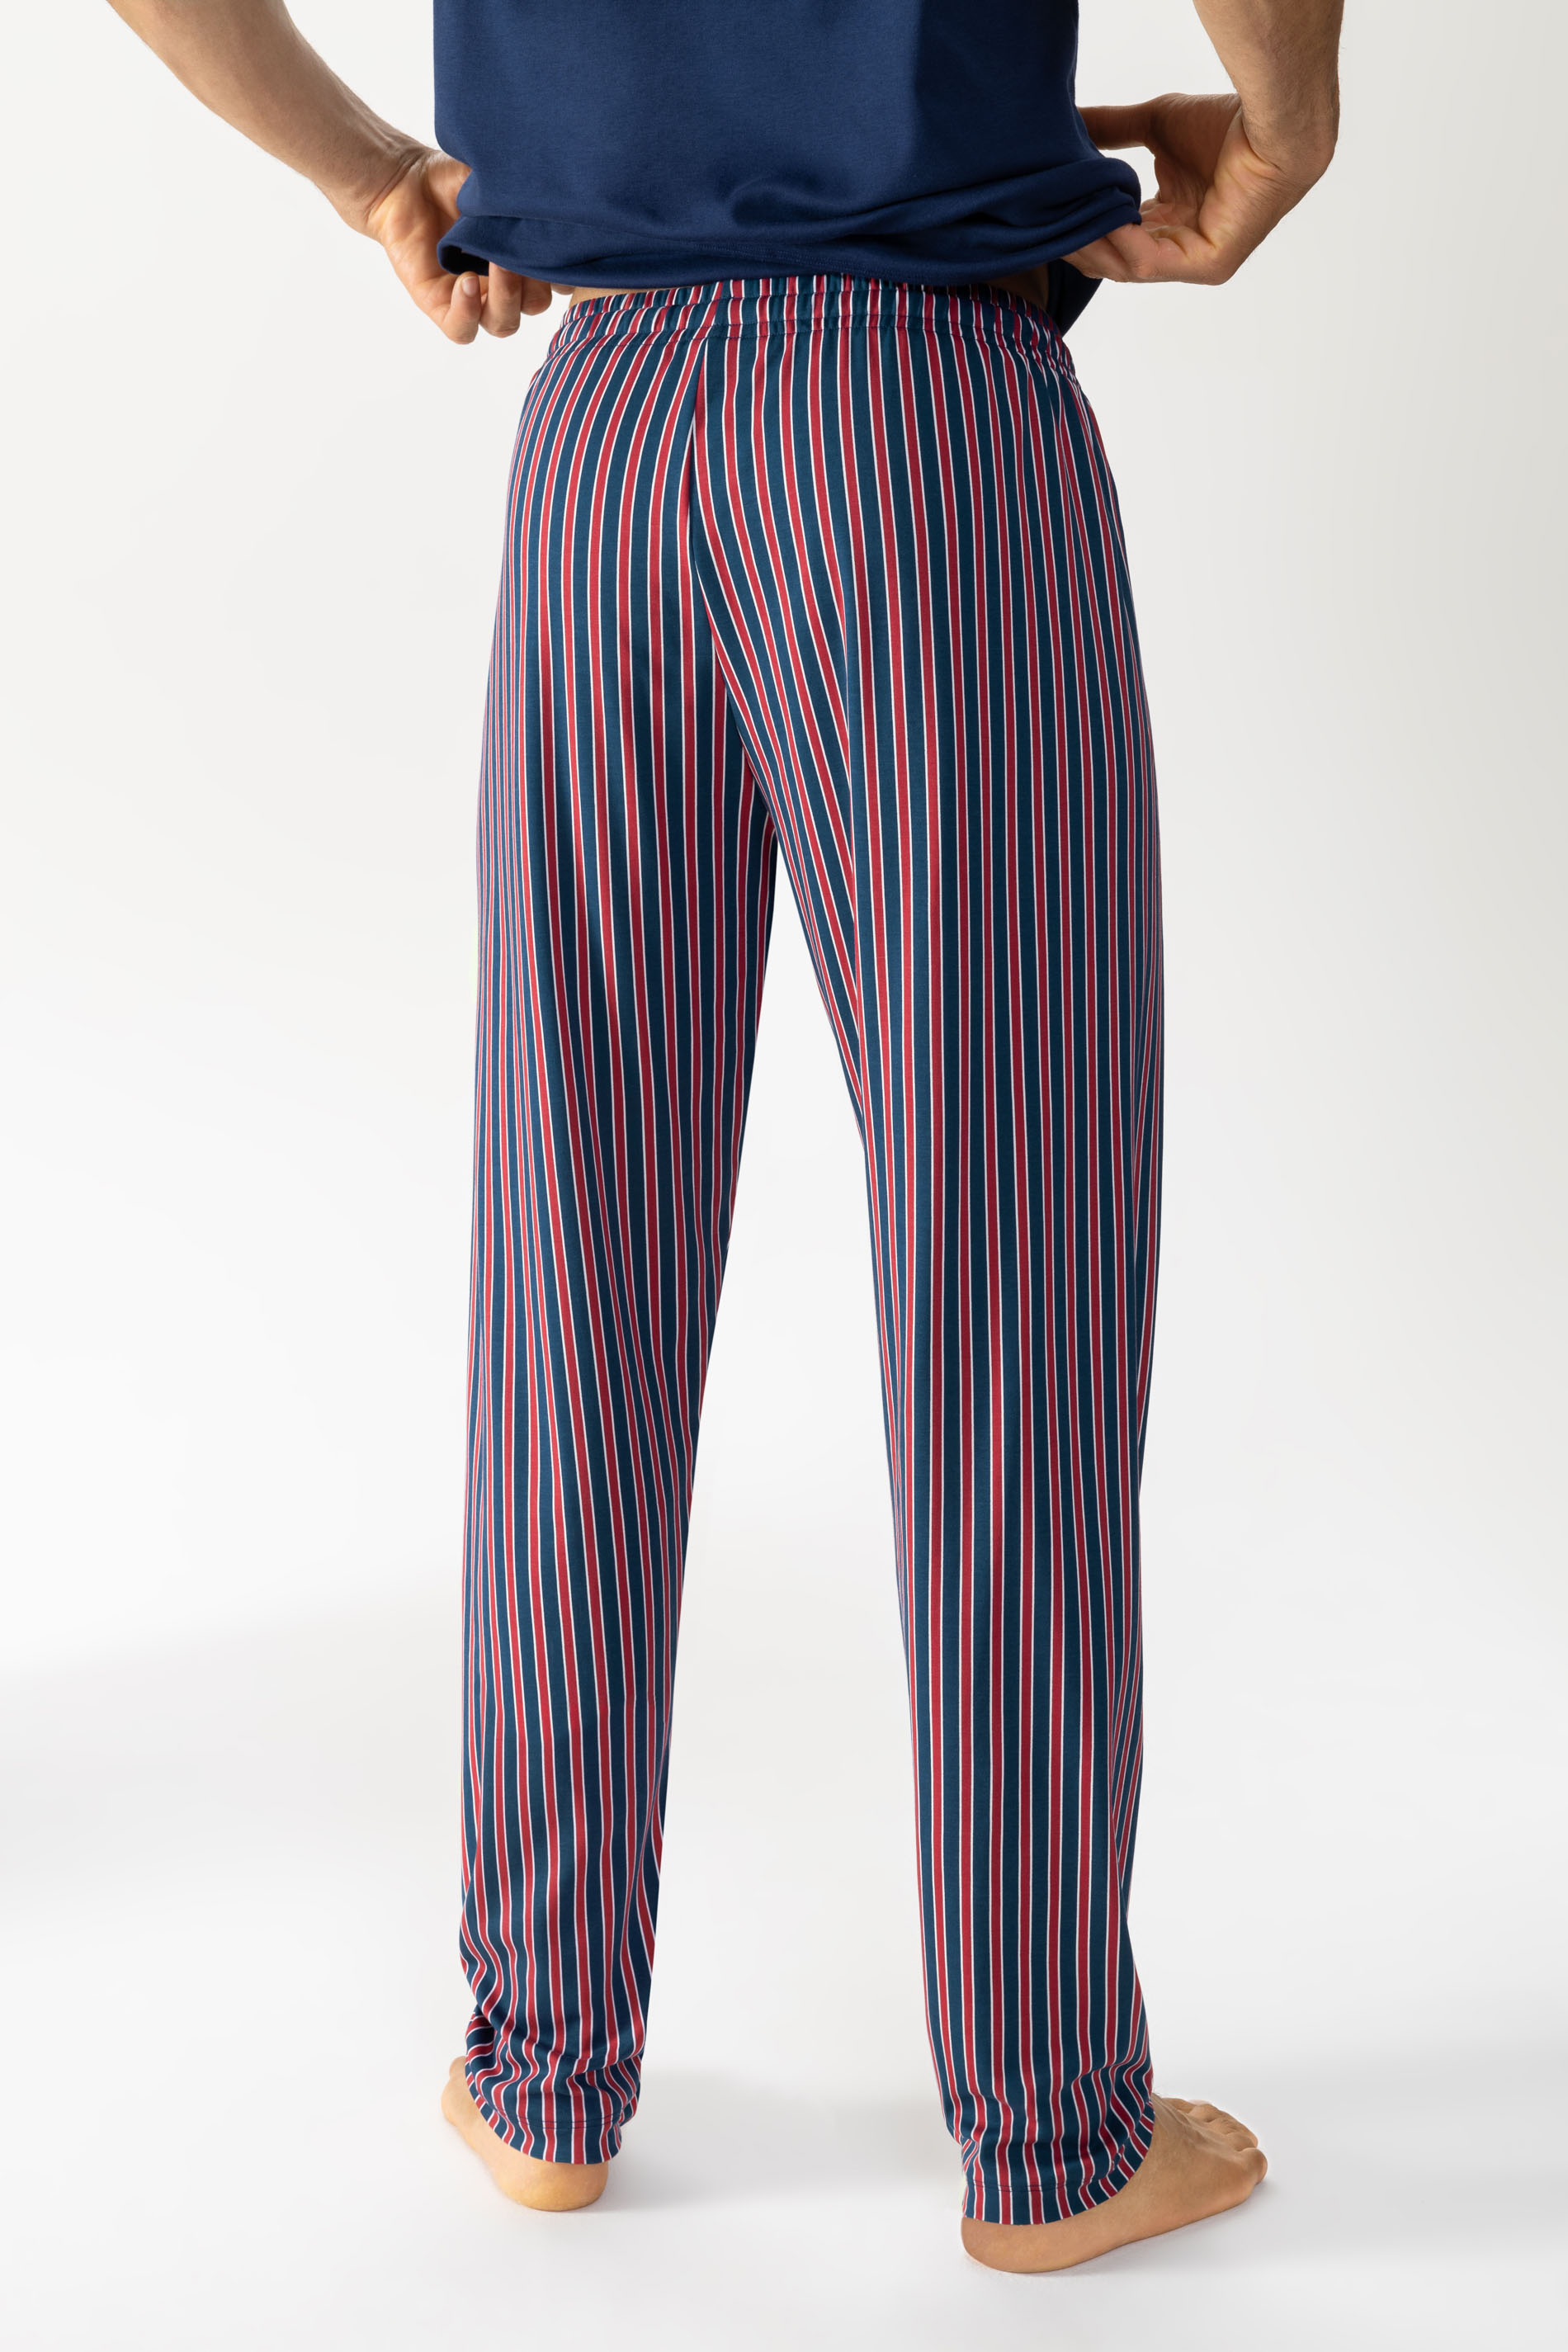 Long bottoms Serie Graphic Stripes Rear View | mey®